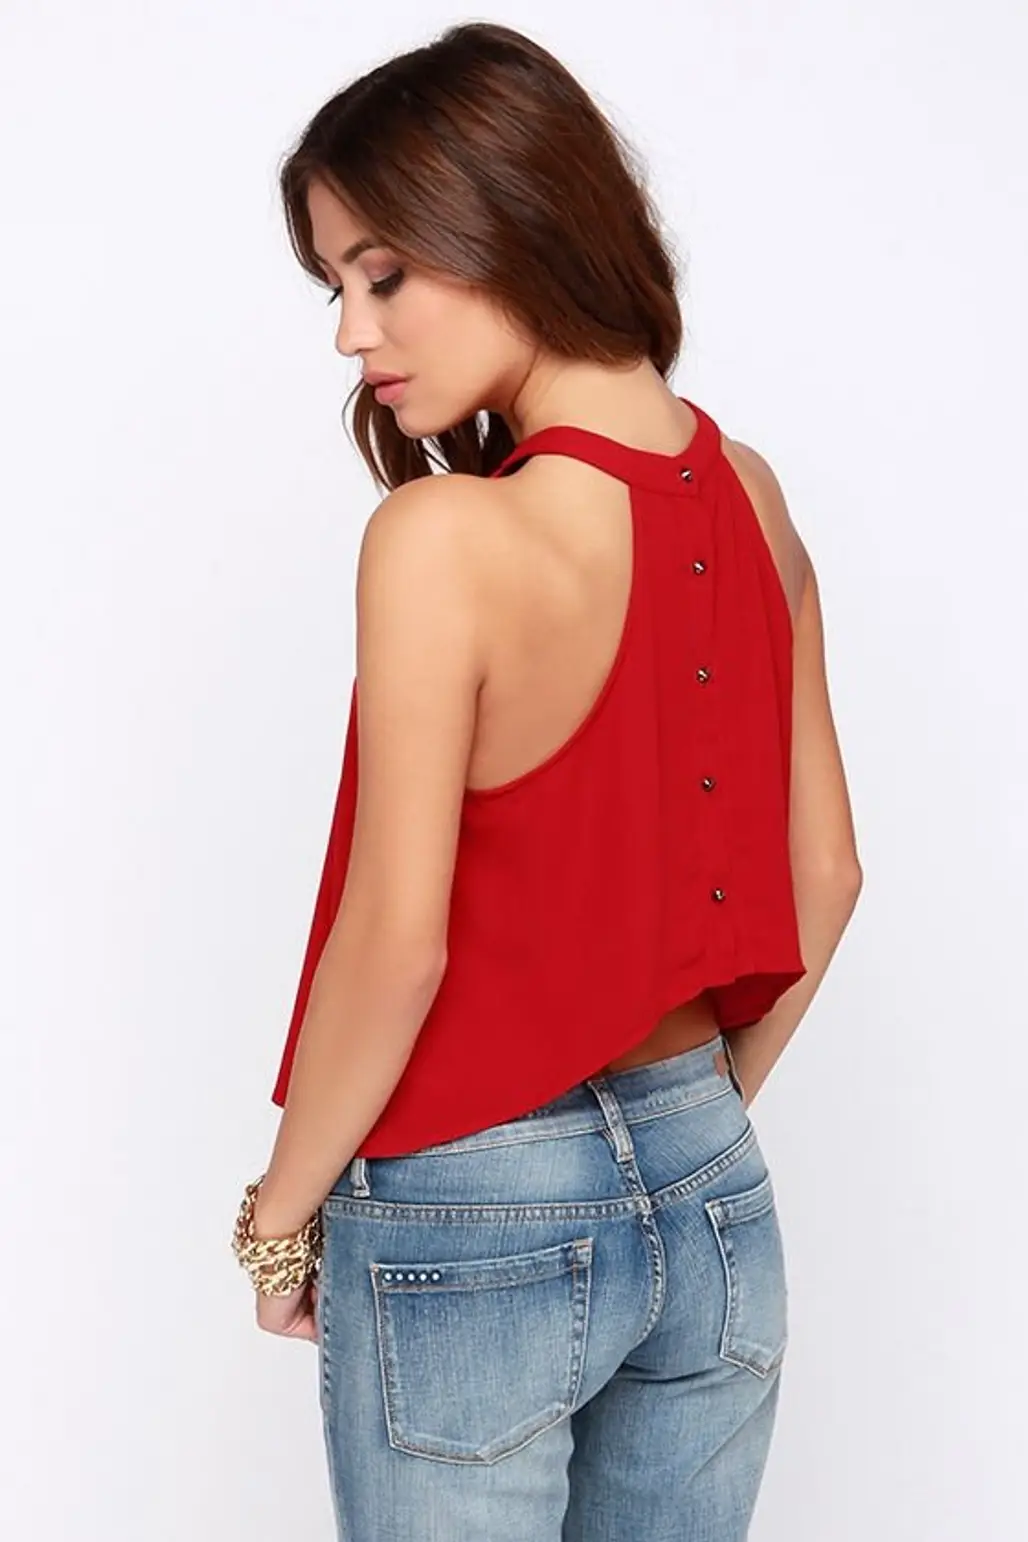 Spike the Punch Red Crop Top